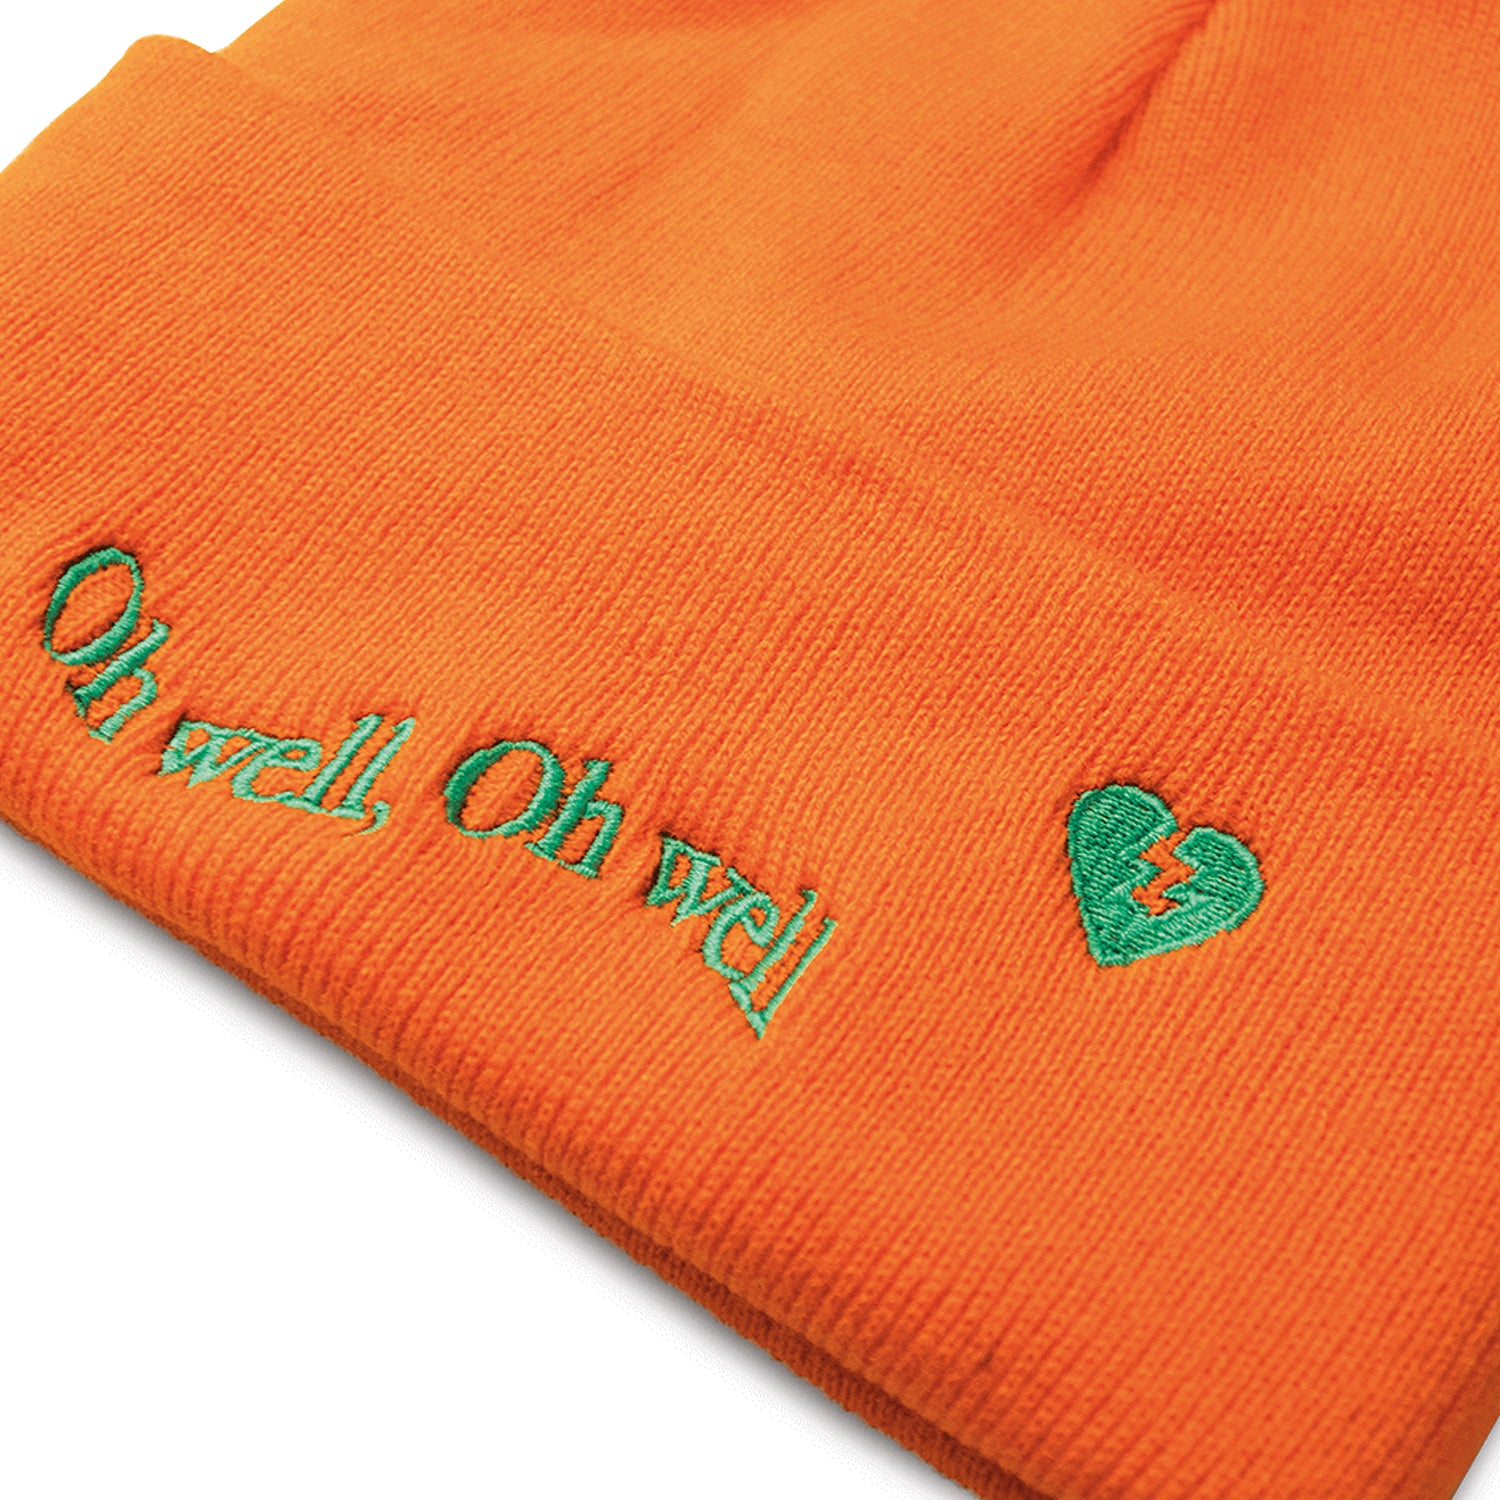 close up, angled image of an orange winter beanie on a white background. front of the beanie has light green embroidery on the cuff that says oh well, oh well and a small broken heart